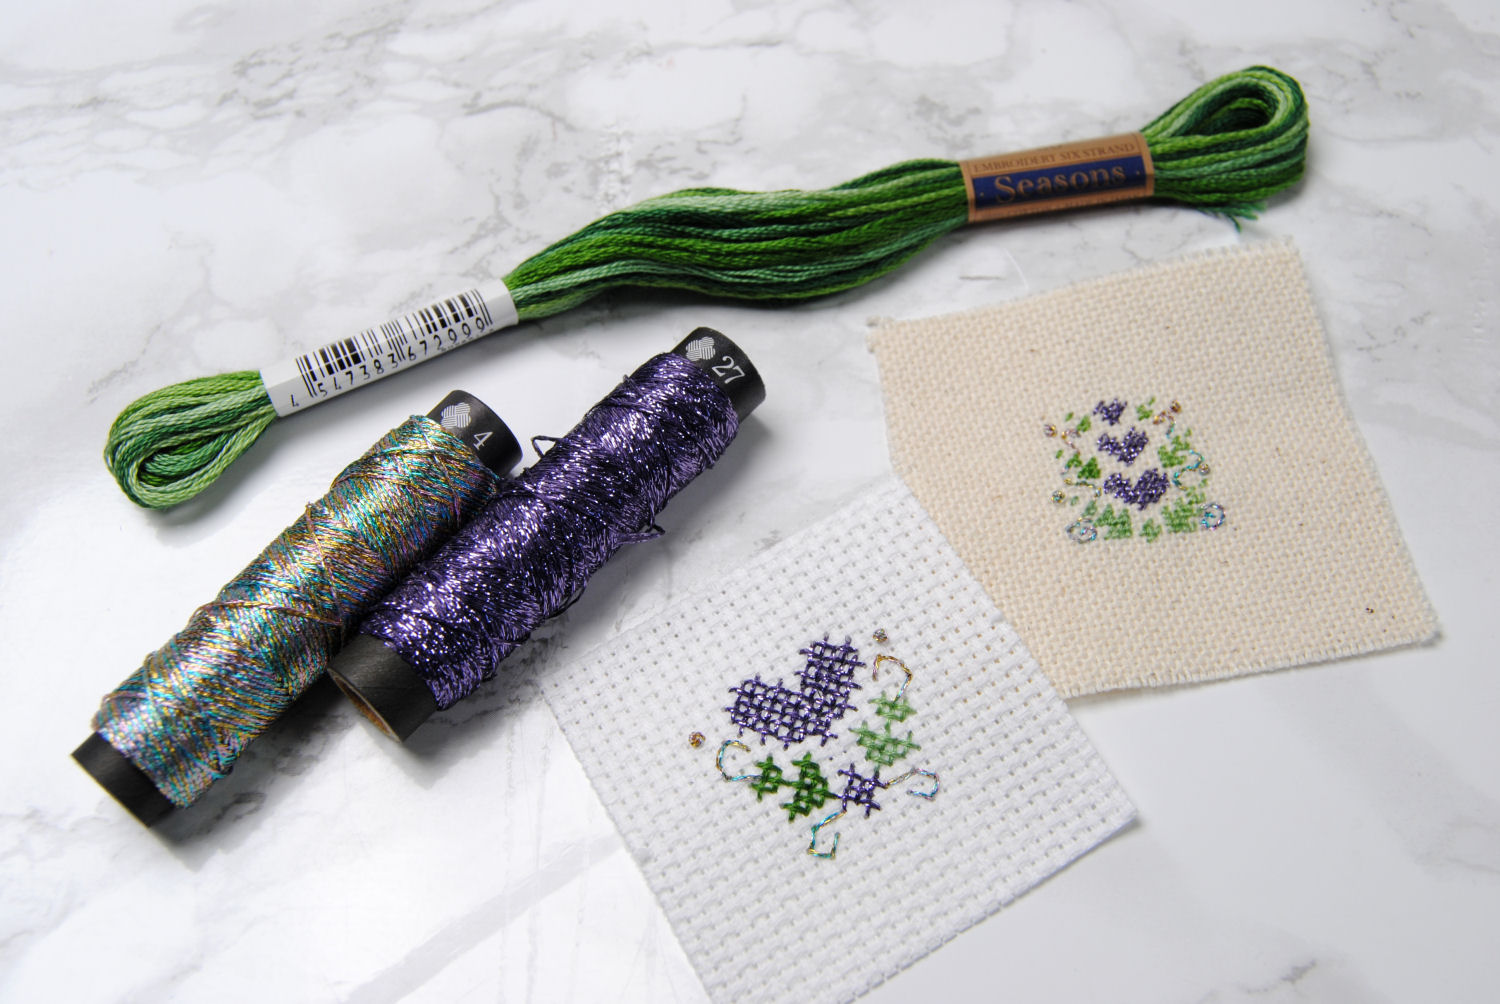 When is it Helpful to use Thread Conditioner for Cross Stitch? 